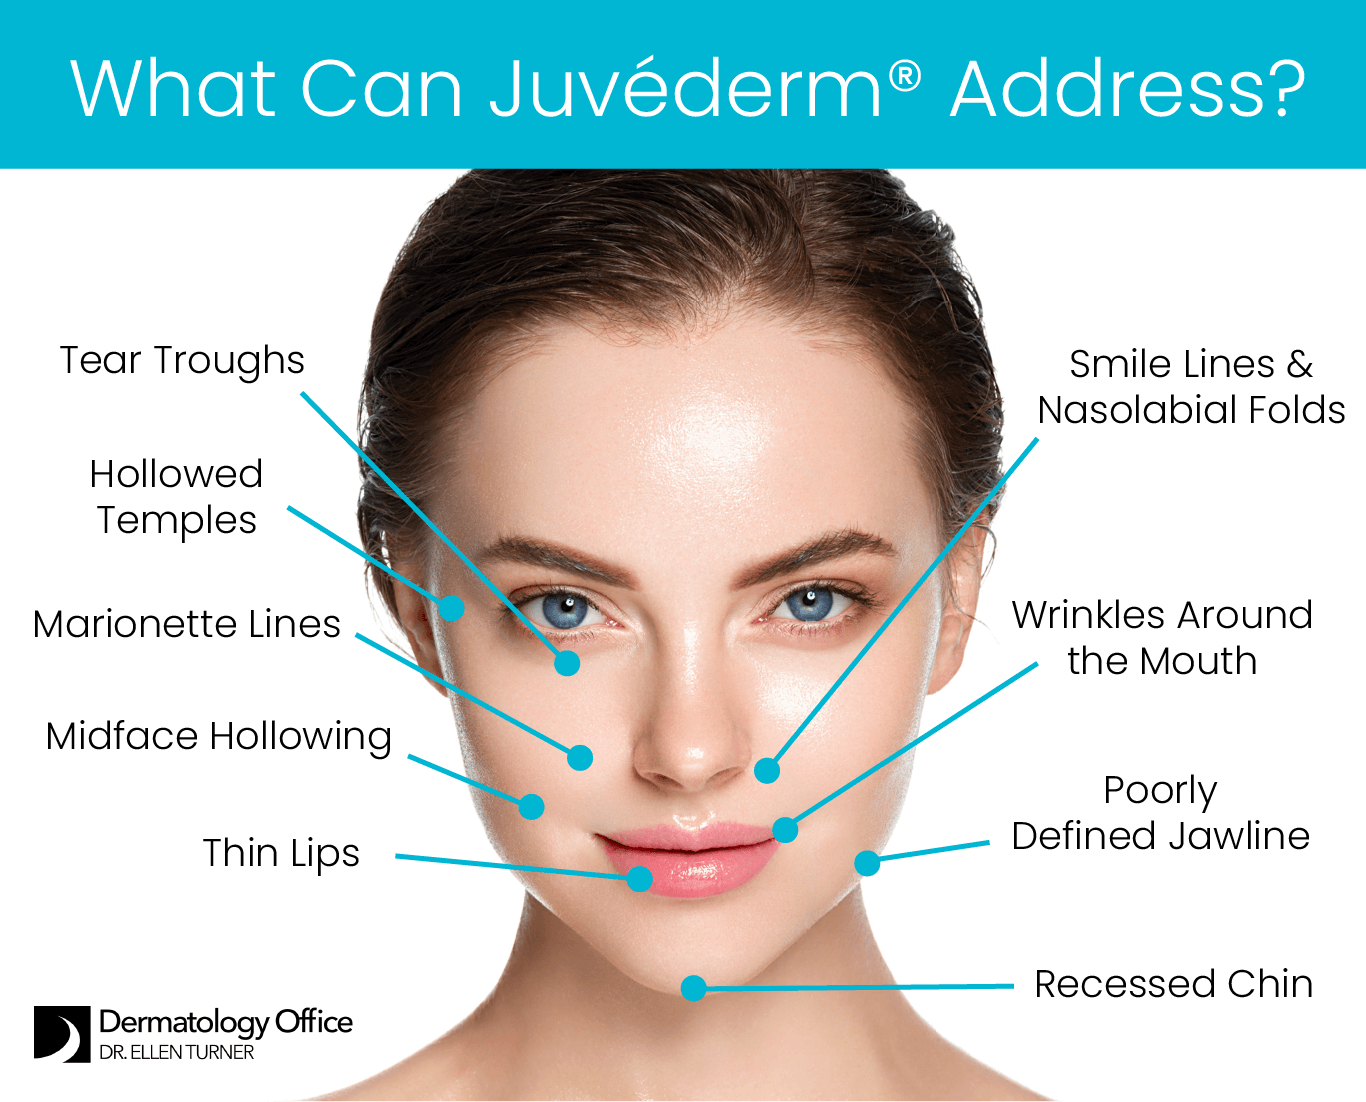 Learn what’s possible with Juvéderm® at Dallas and Irving’s Dermatology Office.